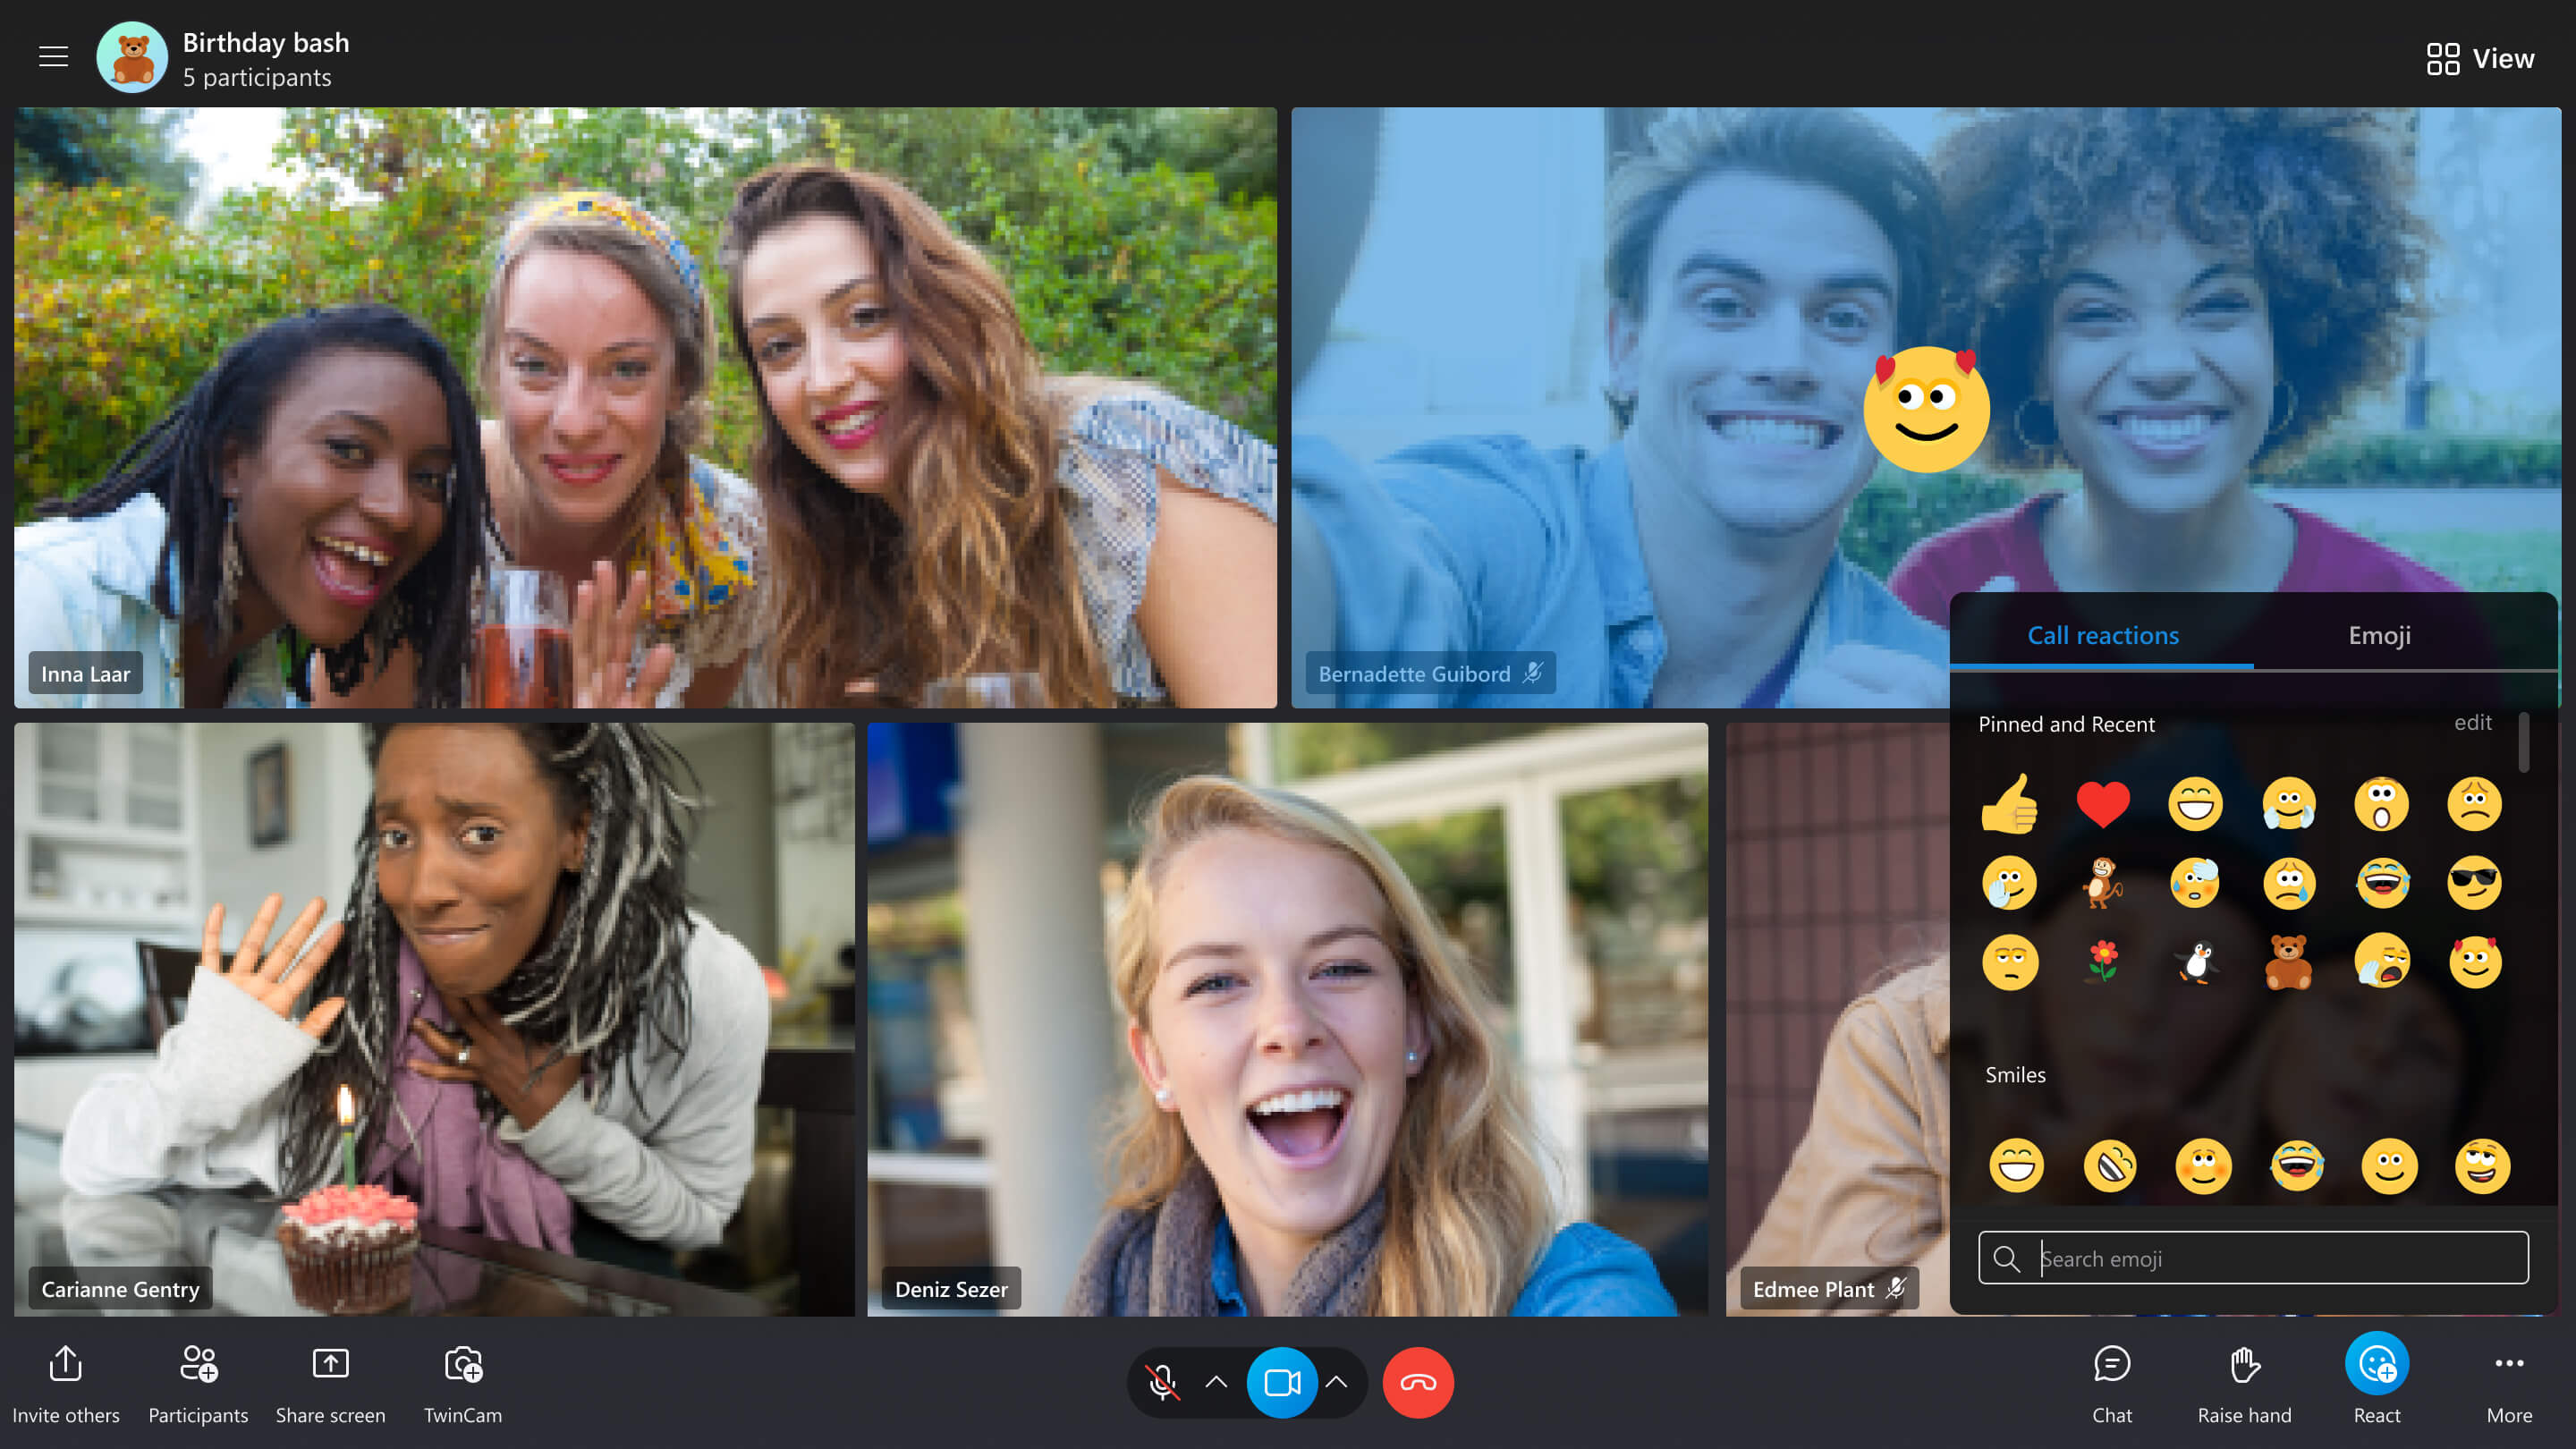 Image showing new improved in call reactions with wide selection of reactions and option to customize.